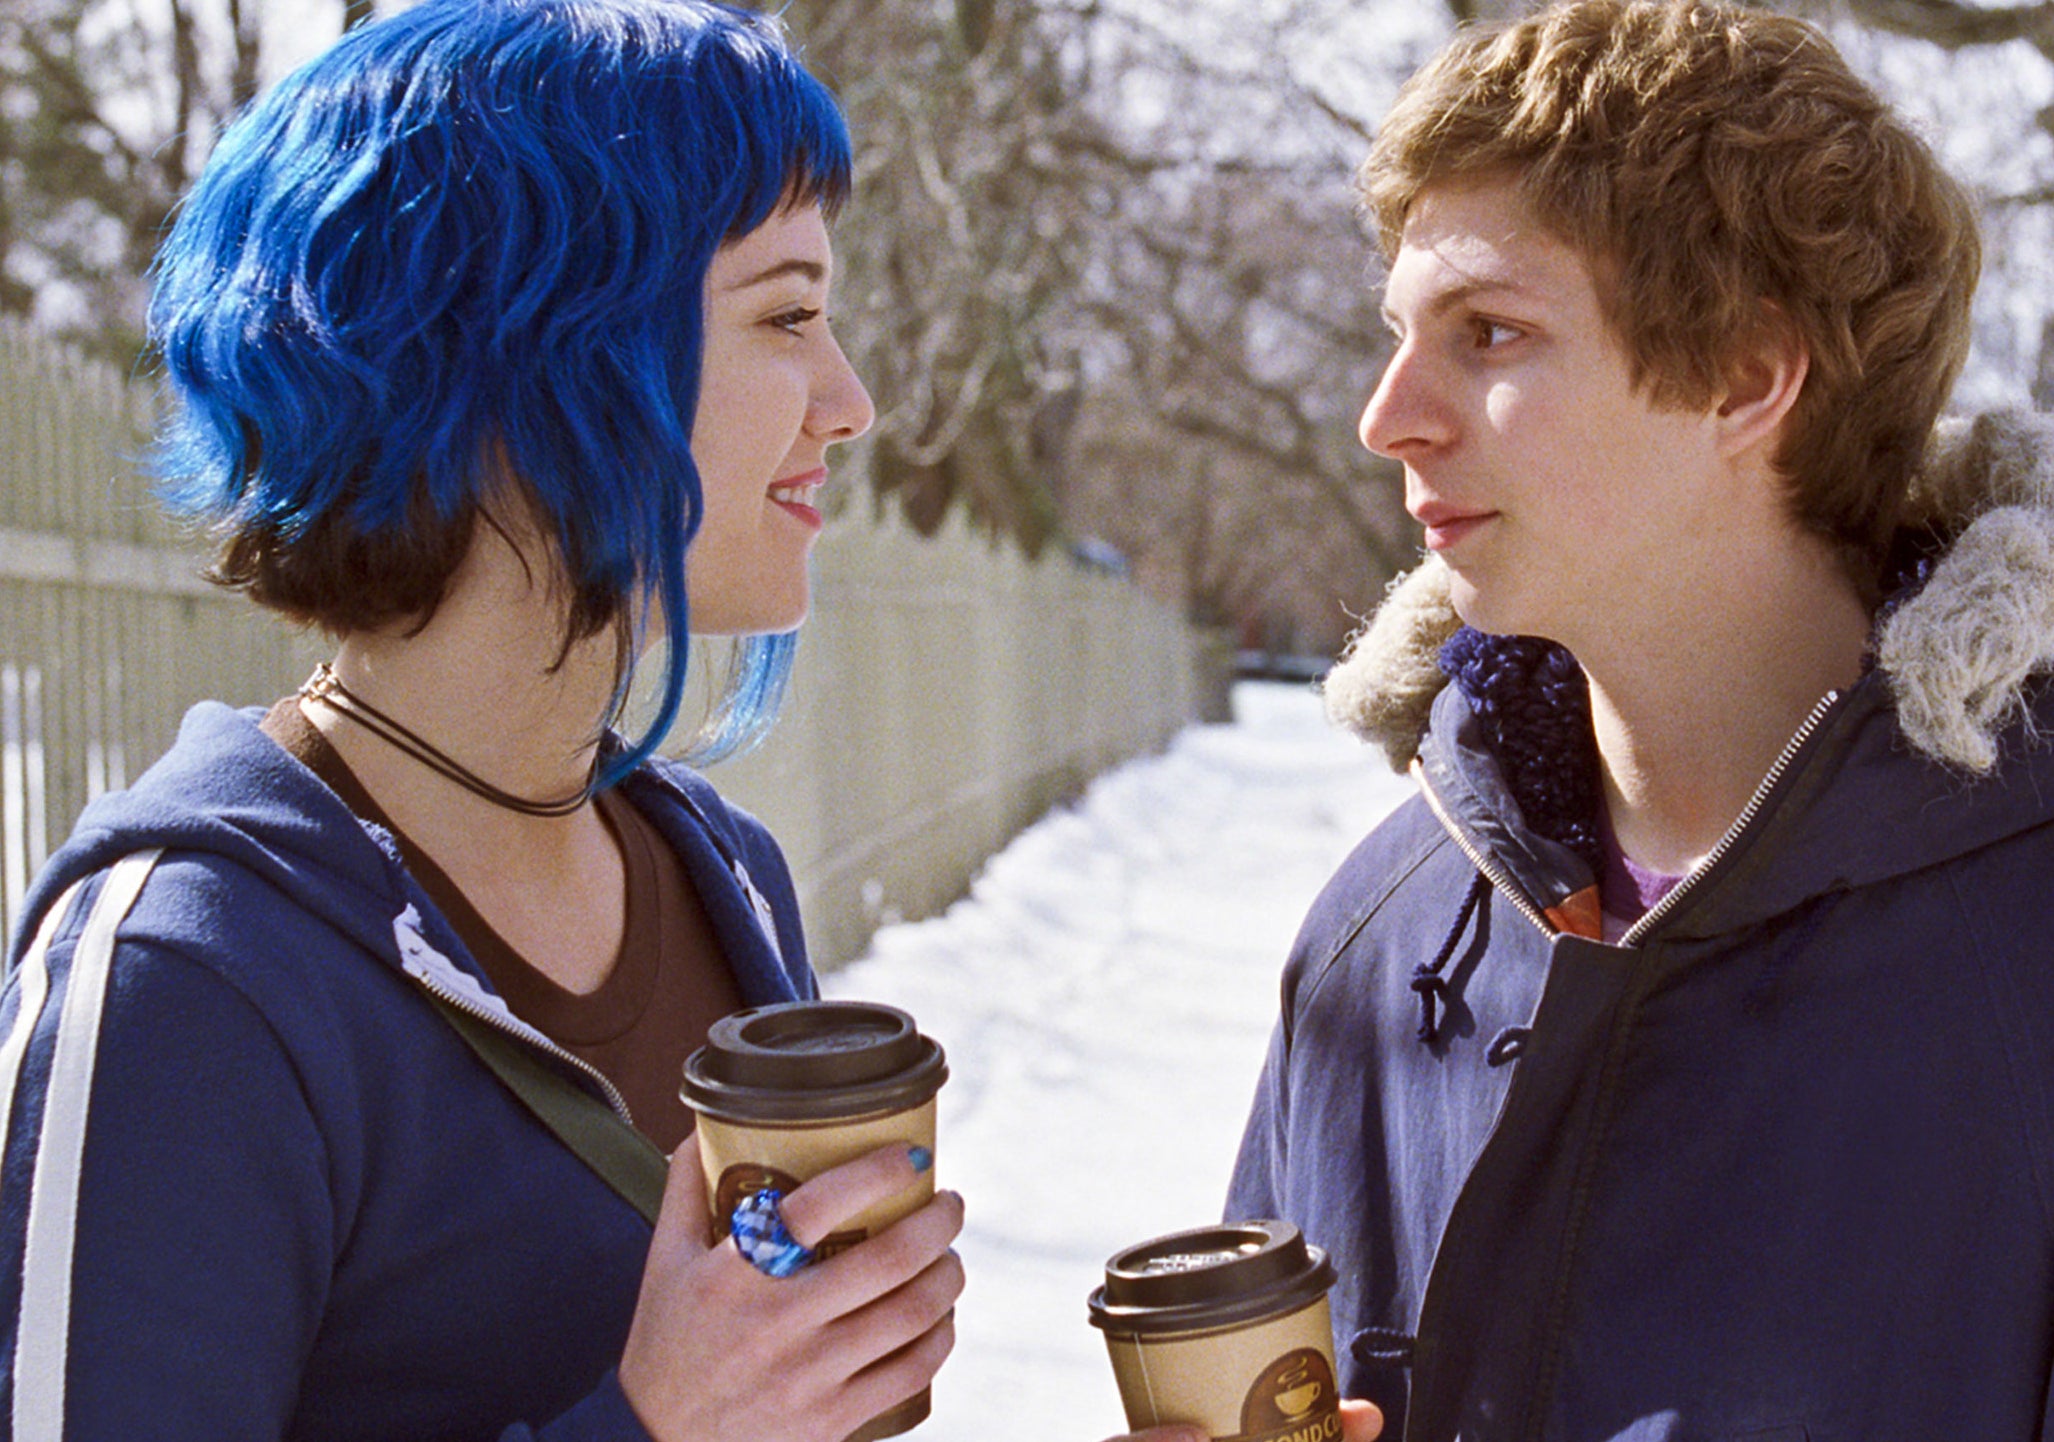 mary elizabeth winstead as Ramona flowers in scott pilgrim vs. the world with dark blue hair with dark brown by the nape of her neck and who longer strands of blue hair framing her face